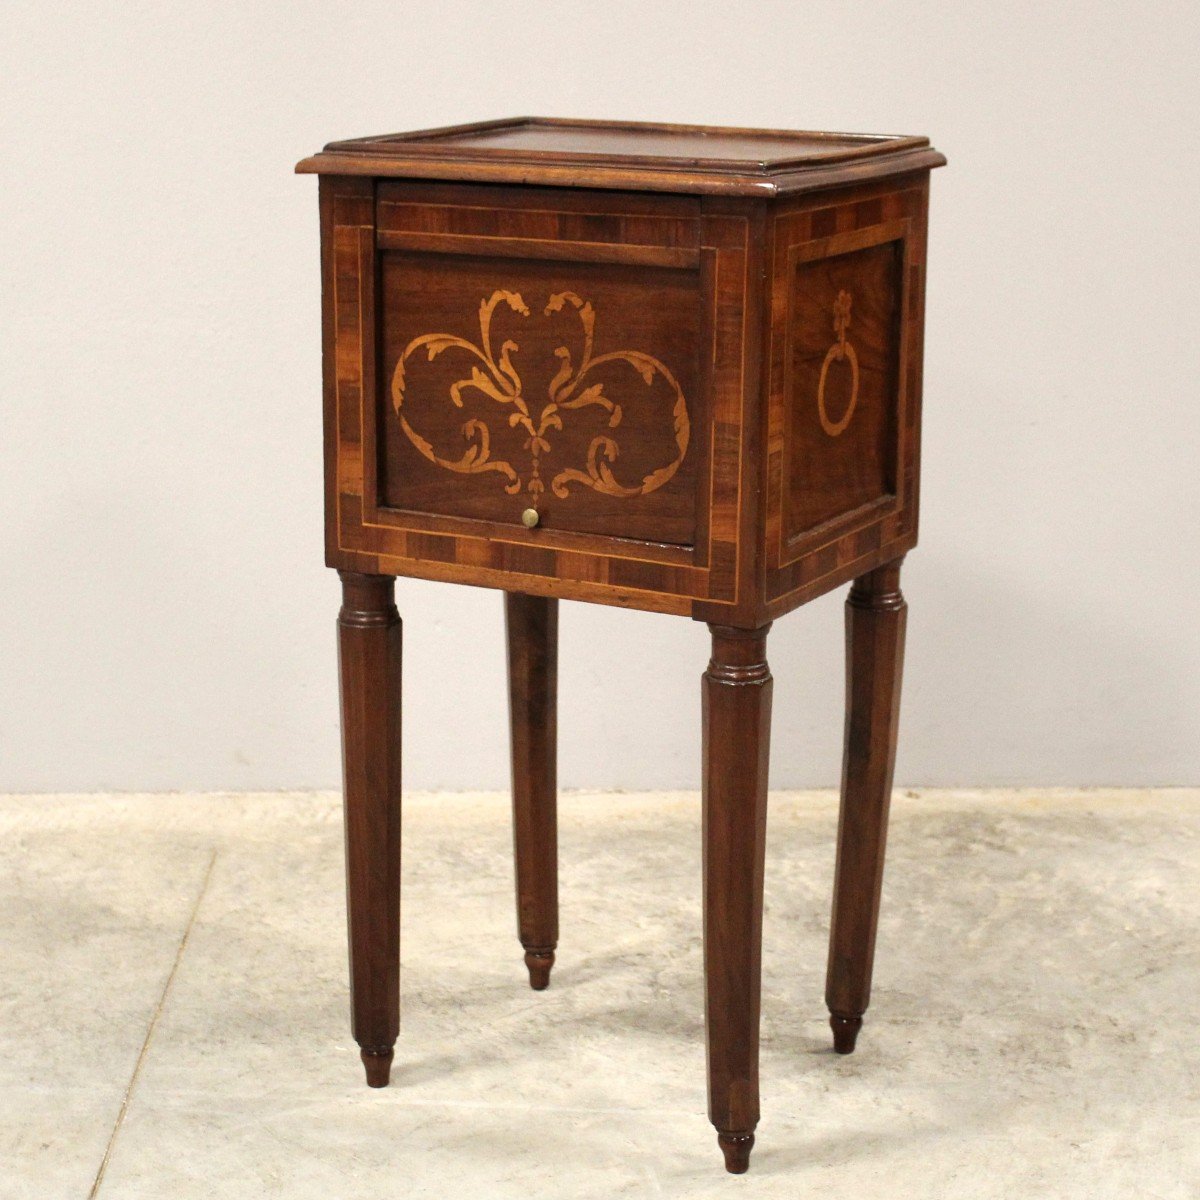 Antique Louis Philippe Bedside Nightstand Table In Walnut And Marquetry - Italy 19th